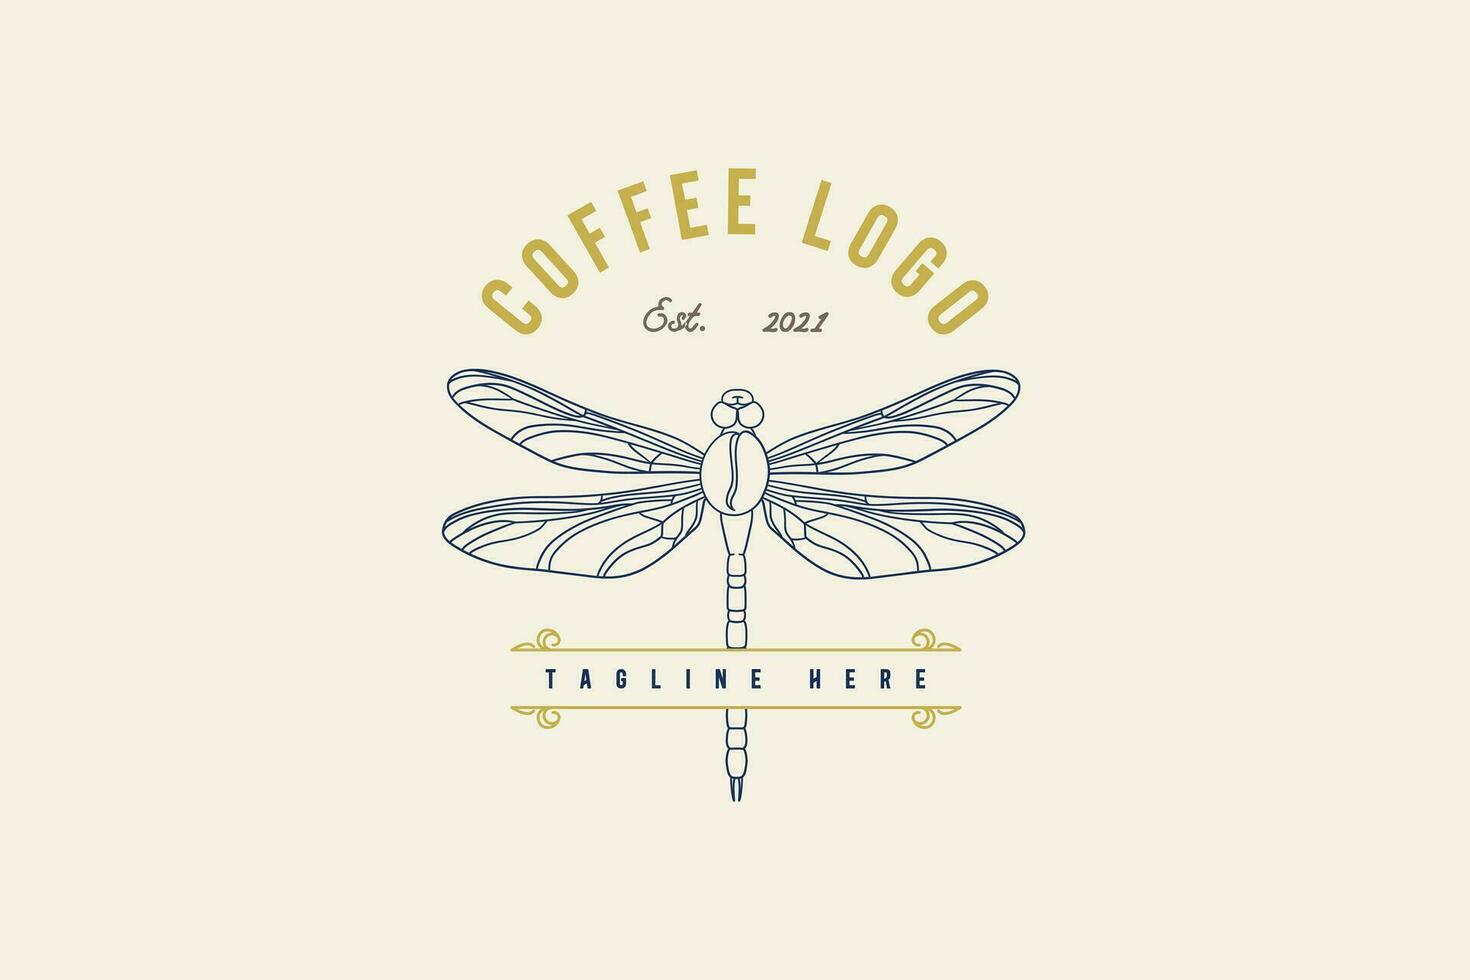 dragonfly coffee logo in vintage style vector